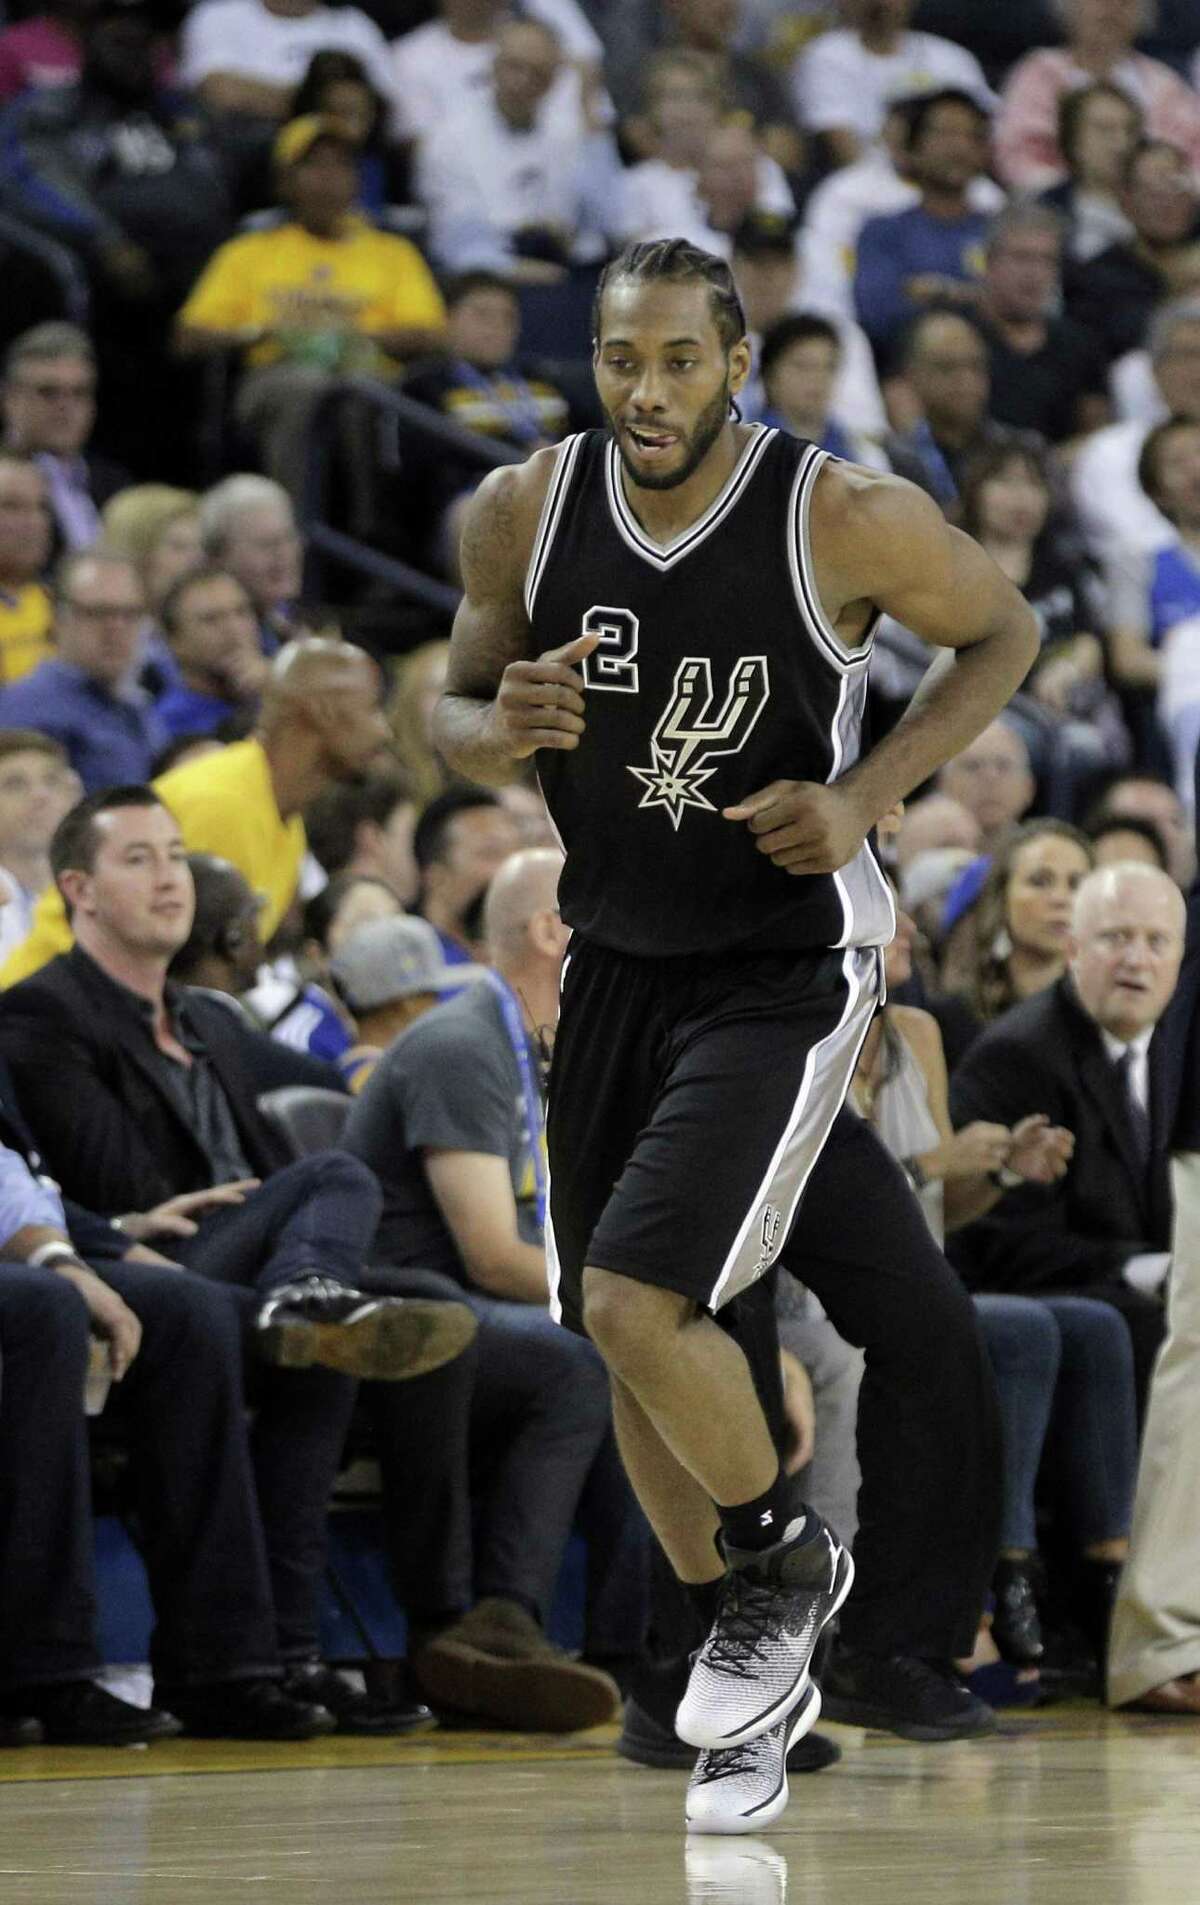 Consensus among the Spurs coverage team is Kawhi Leonard will again lead the team in scoring.